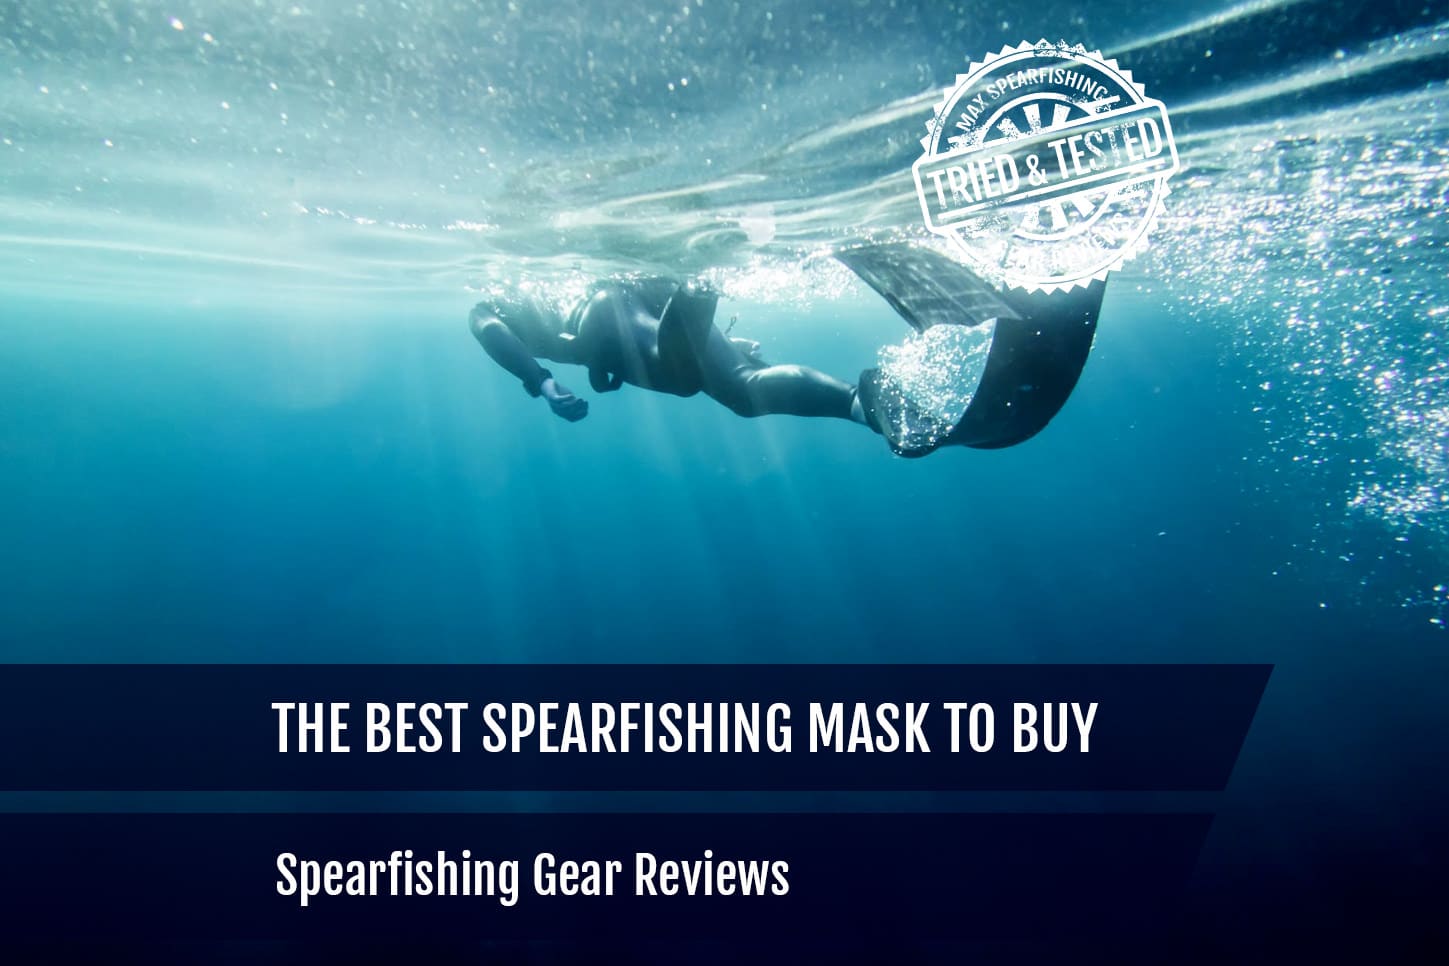 The Best Spearfishing Mask to Buy